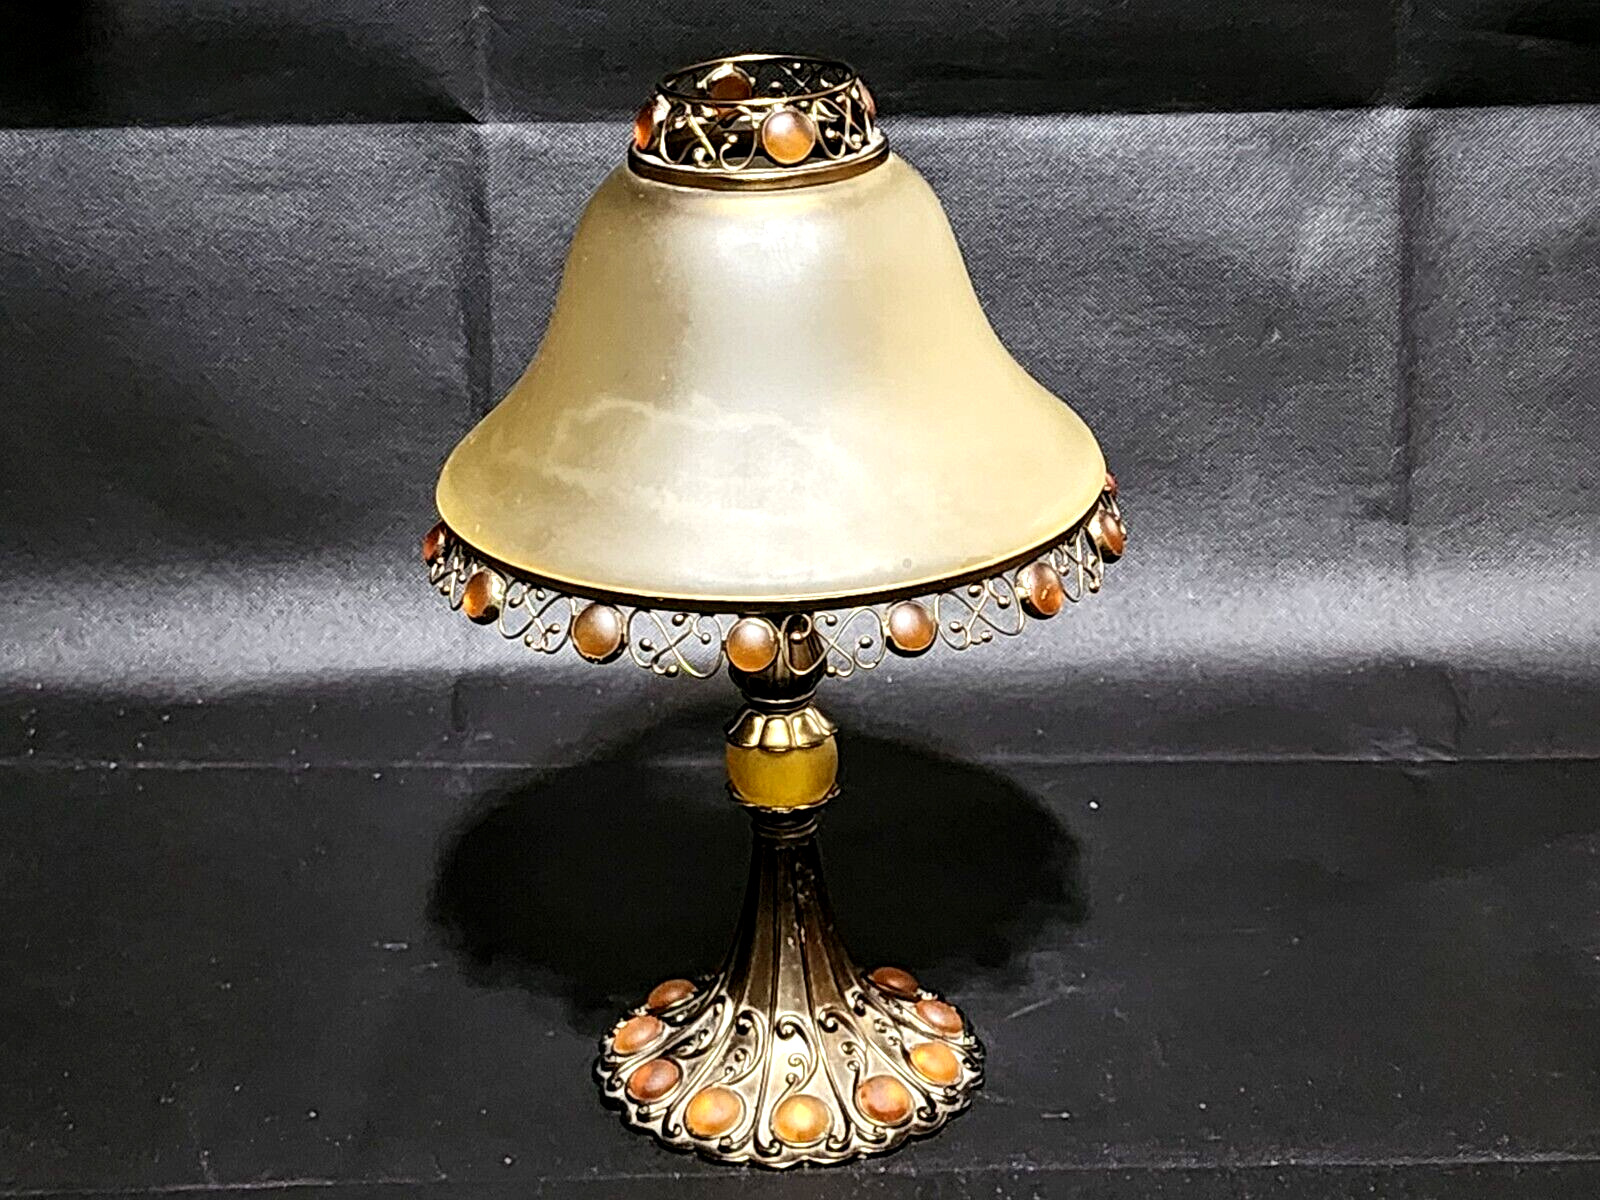 Vintage PartyLite PARIS RETRO Metal Tealight Candle Holder Lamp With Glass Shade